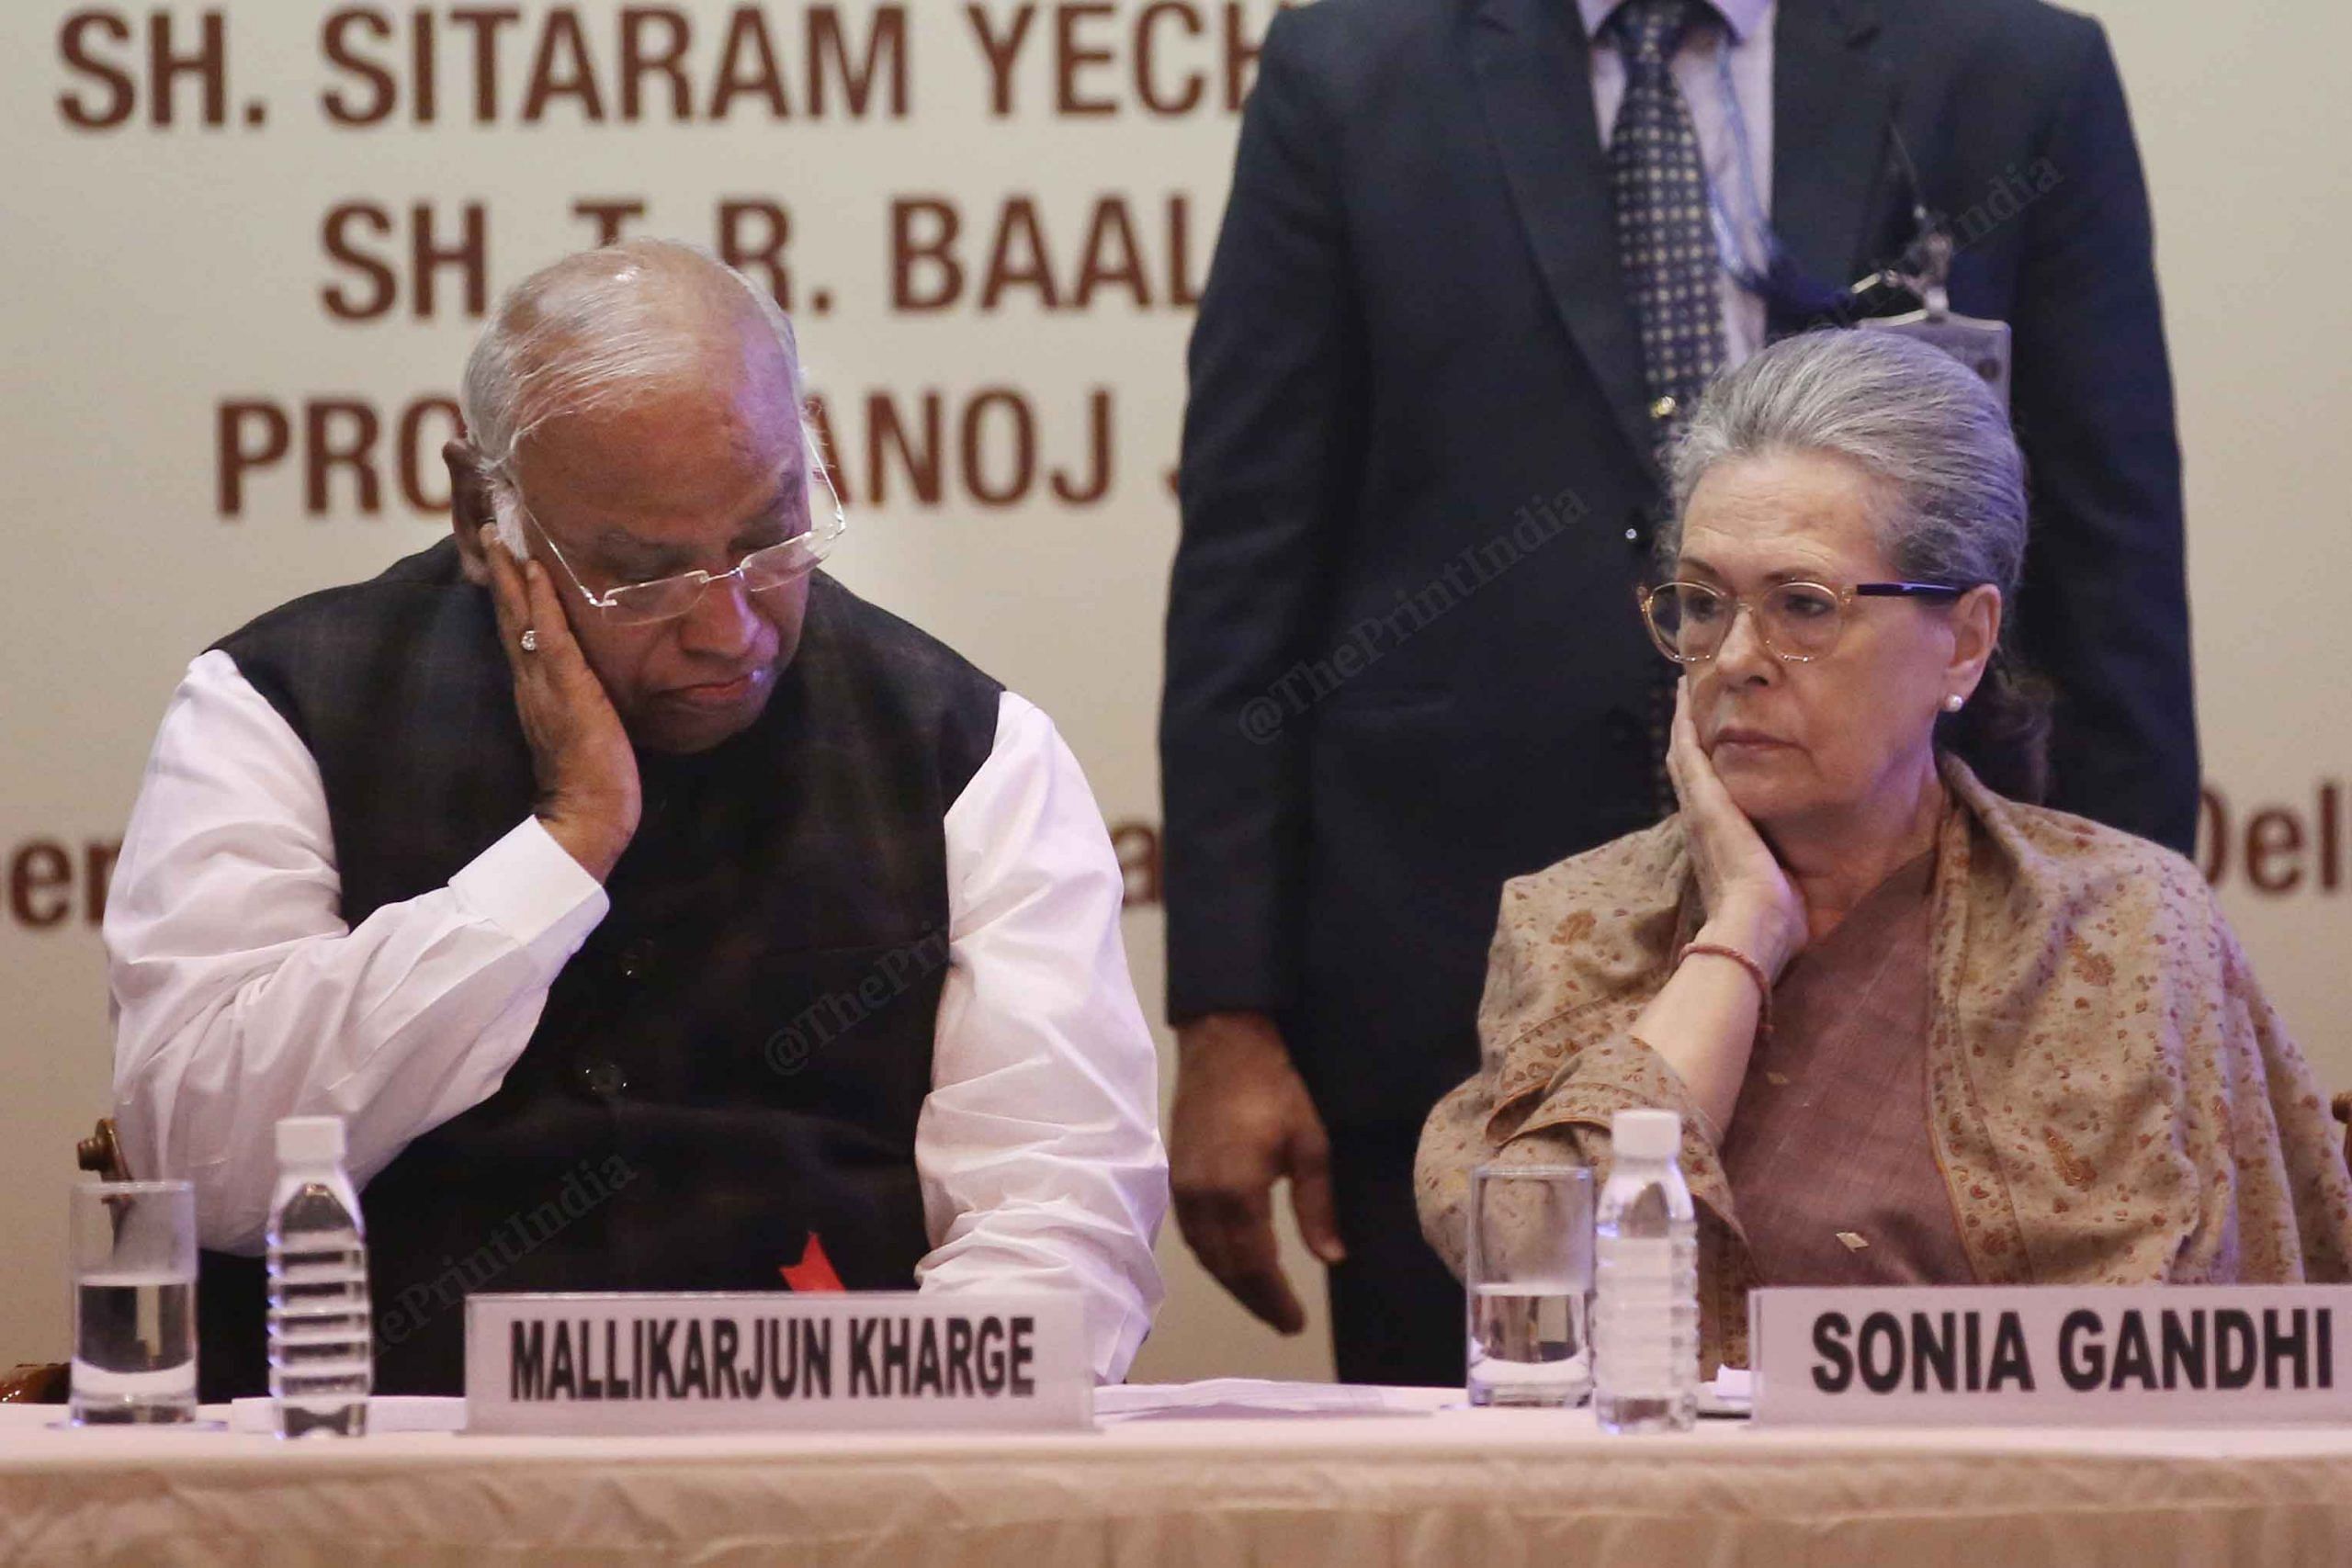 This image of Congress president Mallikarjun Kharge and the party's Parliamentary Party chairperson Sonia Gandhi was taken days before the announcement of assembly election results in the states of Rajasthan, Madhya Pradesh, Chhattisgarh, Telangana and Mizoram this month. The image becomes significant in retrospect as the somber expression on the faces of the two leaders is in stark contrast to the confidence the party had voiced about winning most of these states. It ultimately won in only Telangana | Photo: Manisha Mondal | ThePrint